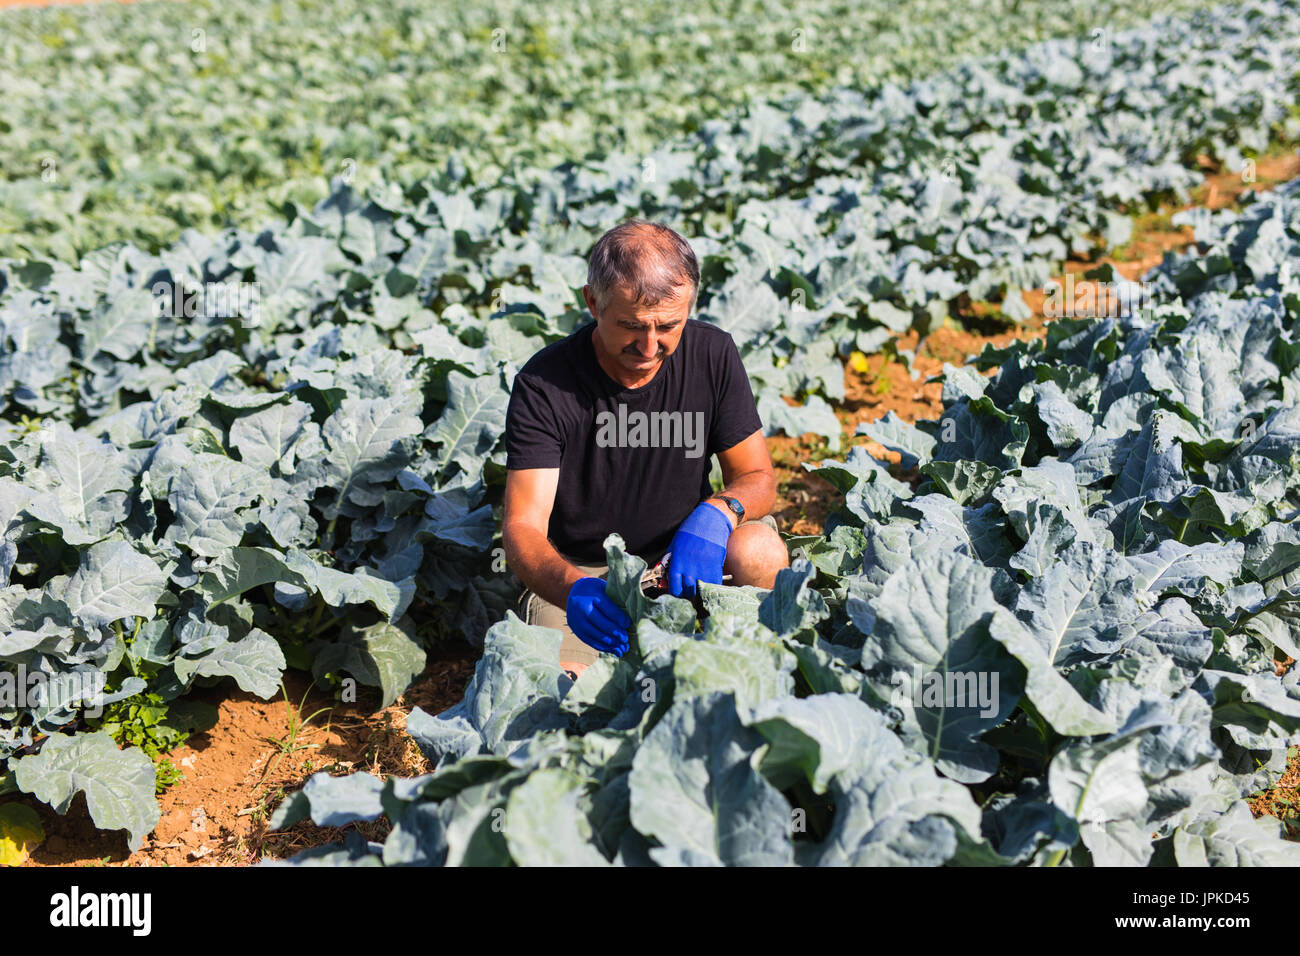 Gardening a Man with organic salad in a vegetable garden. sunlight Stock Photo